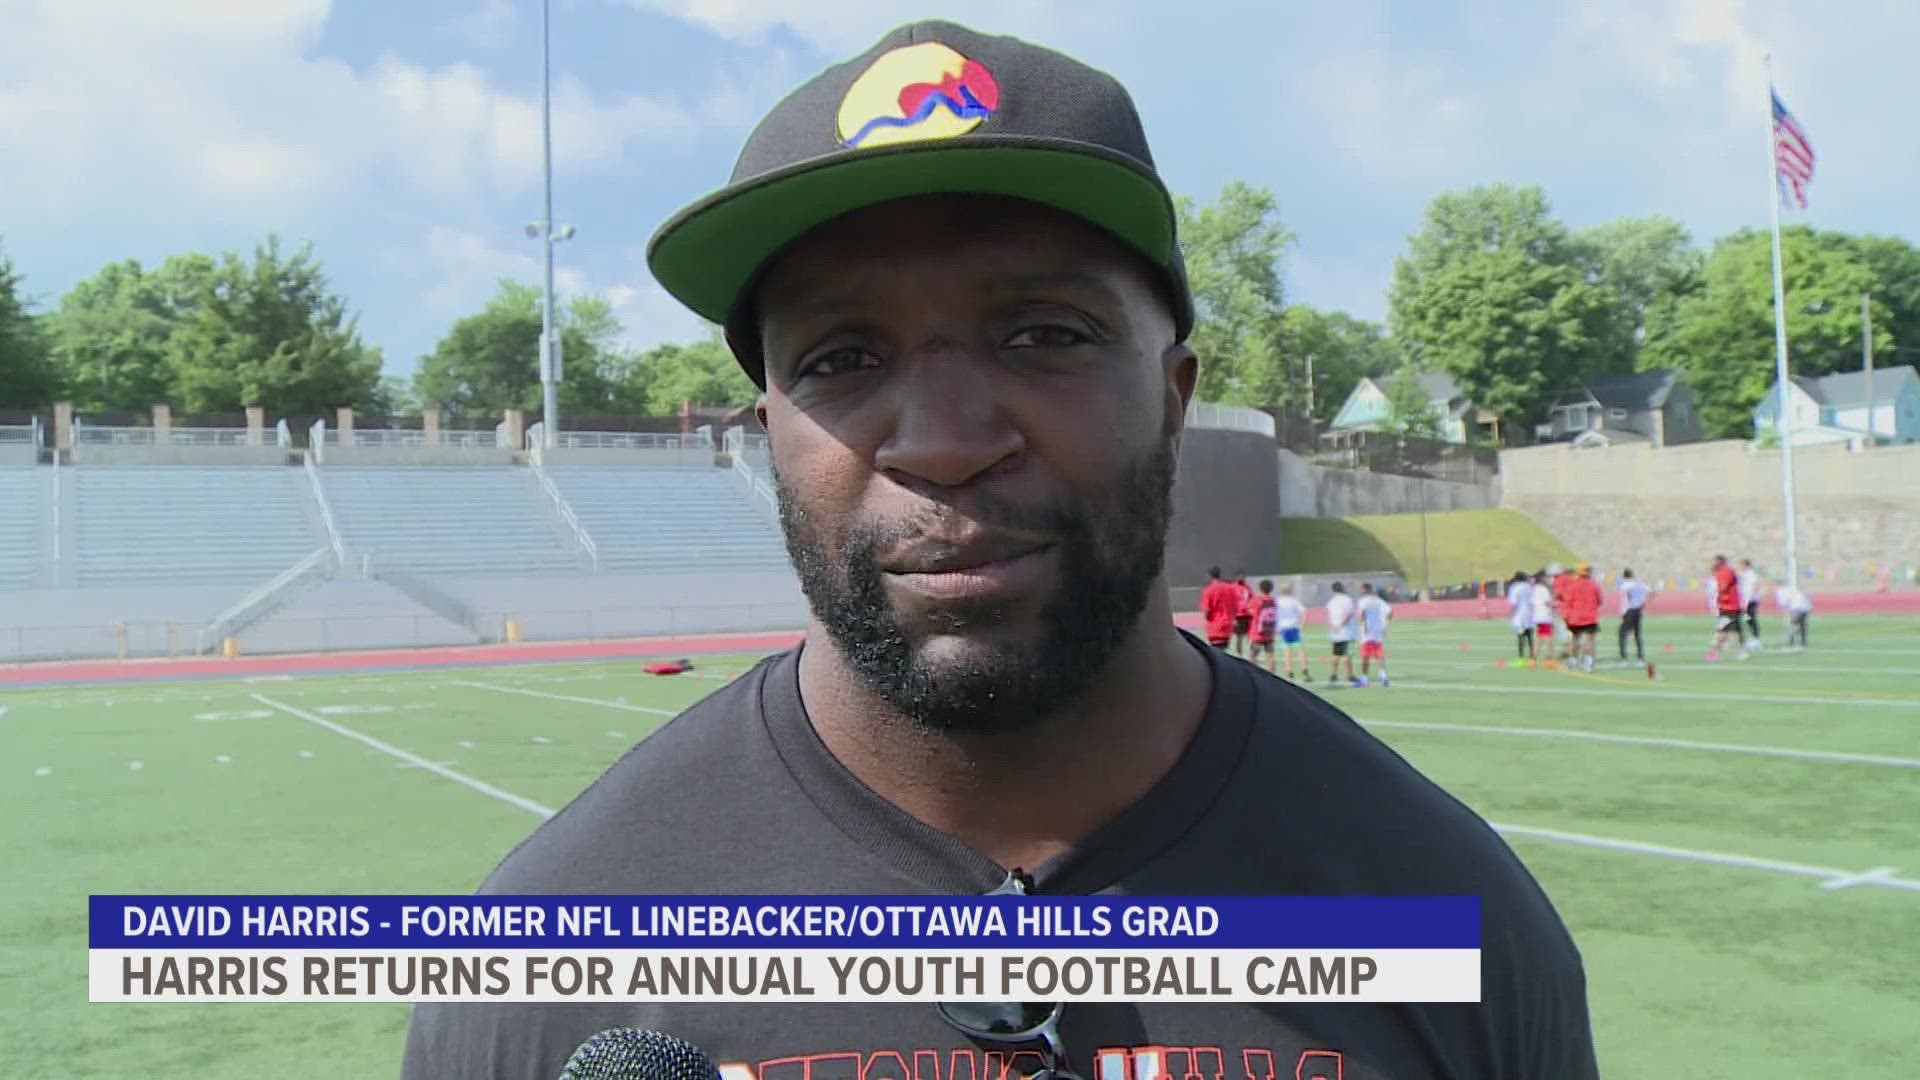 NFL linebacker David Harris returns home for his annual youth football camp at at Ottawa Hills High School. The camp started back in 2007.